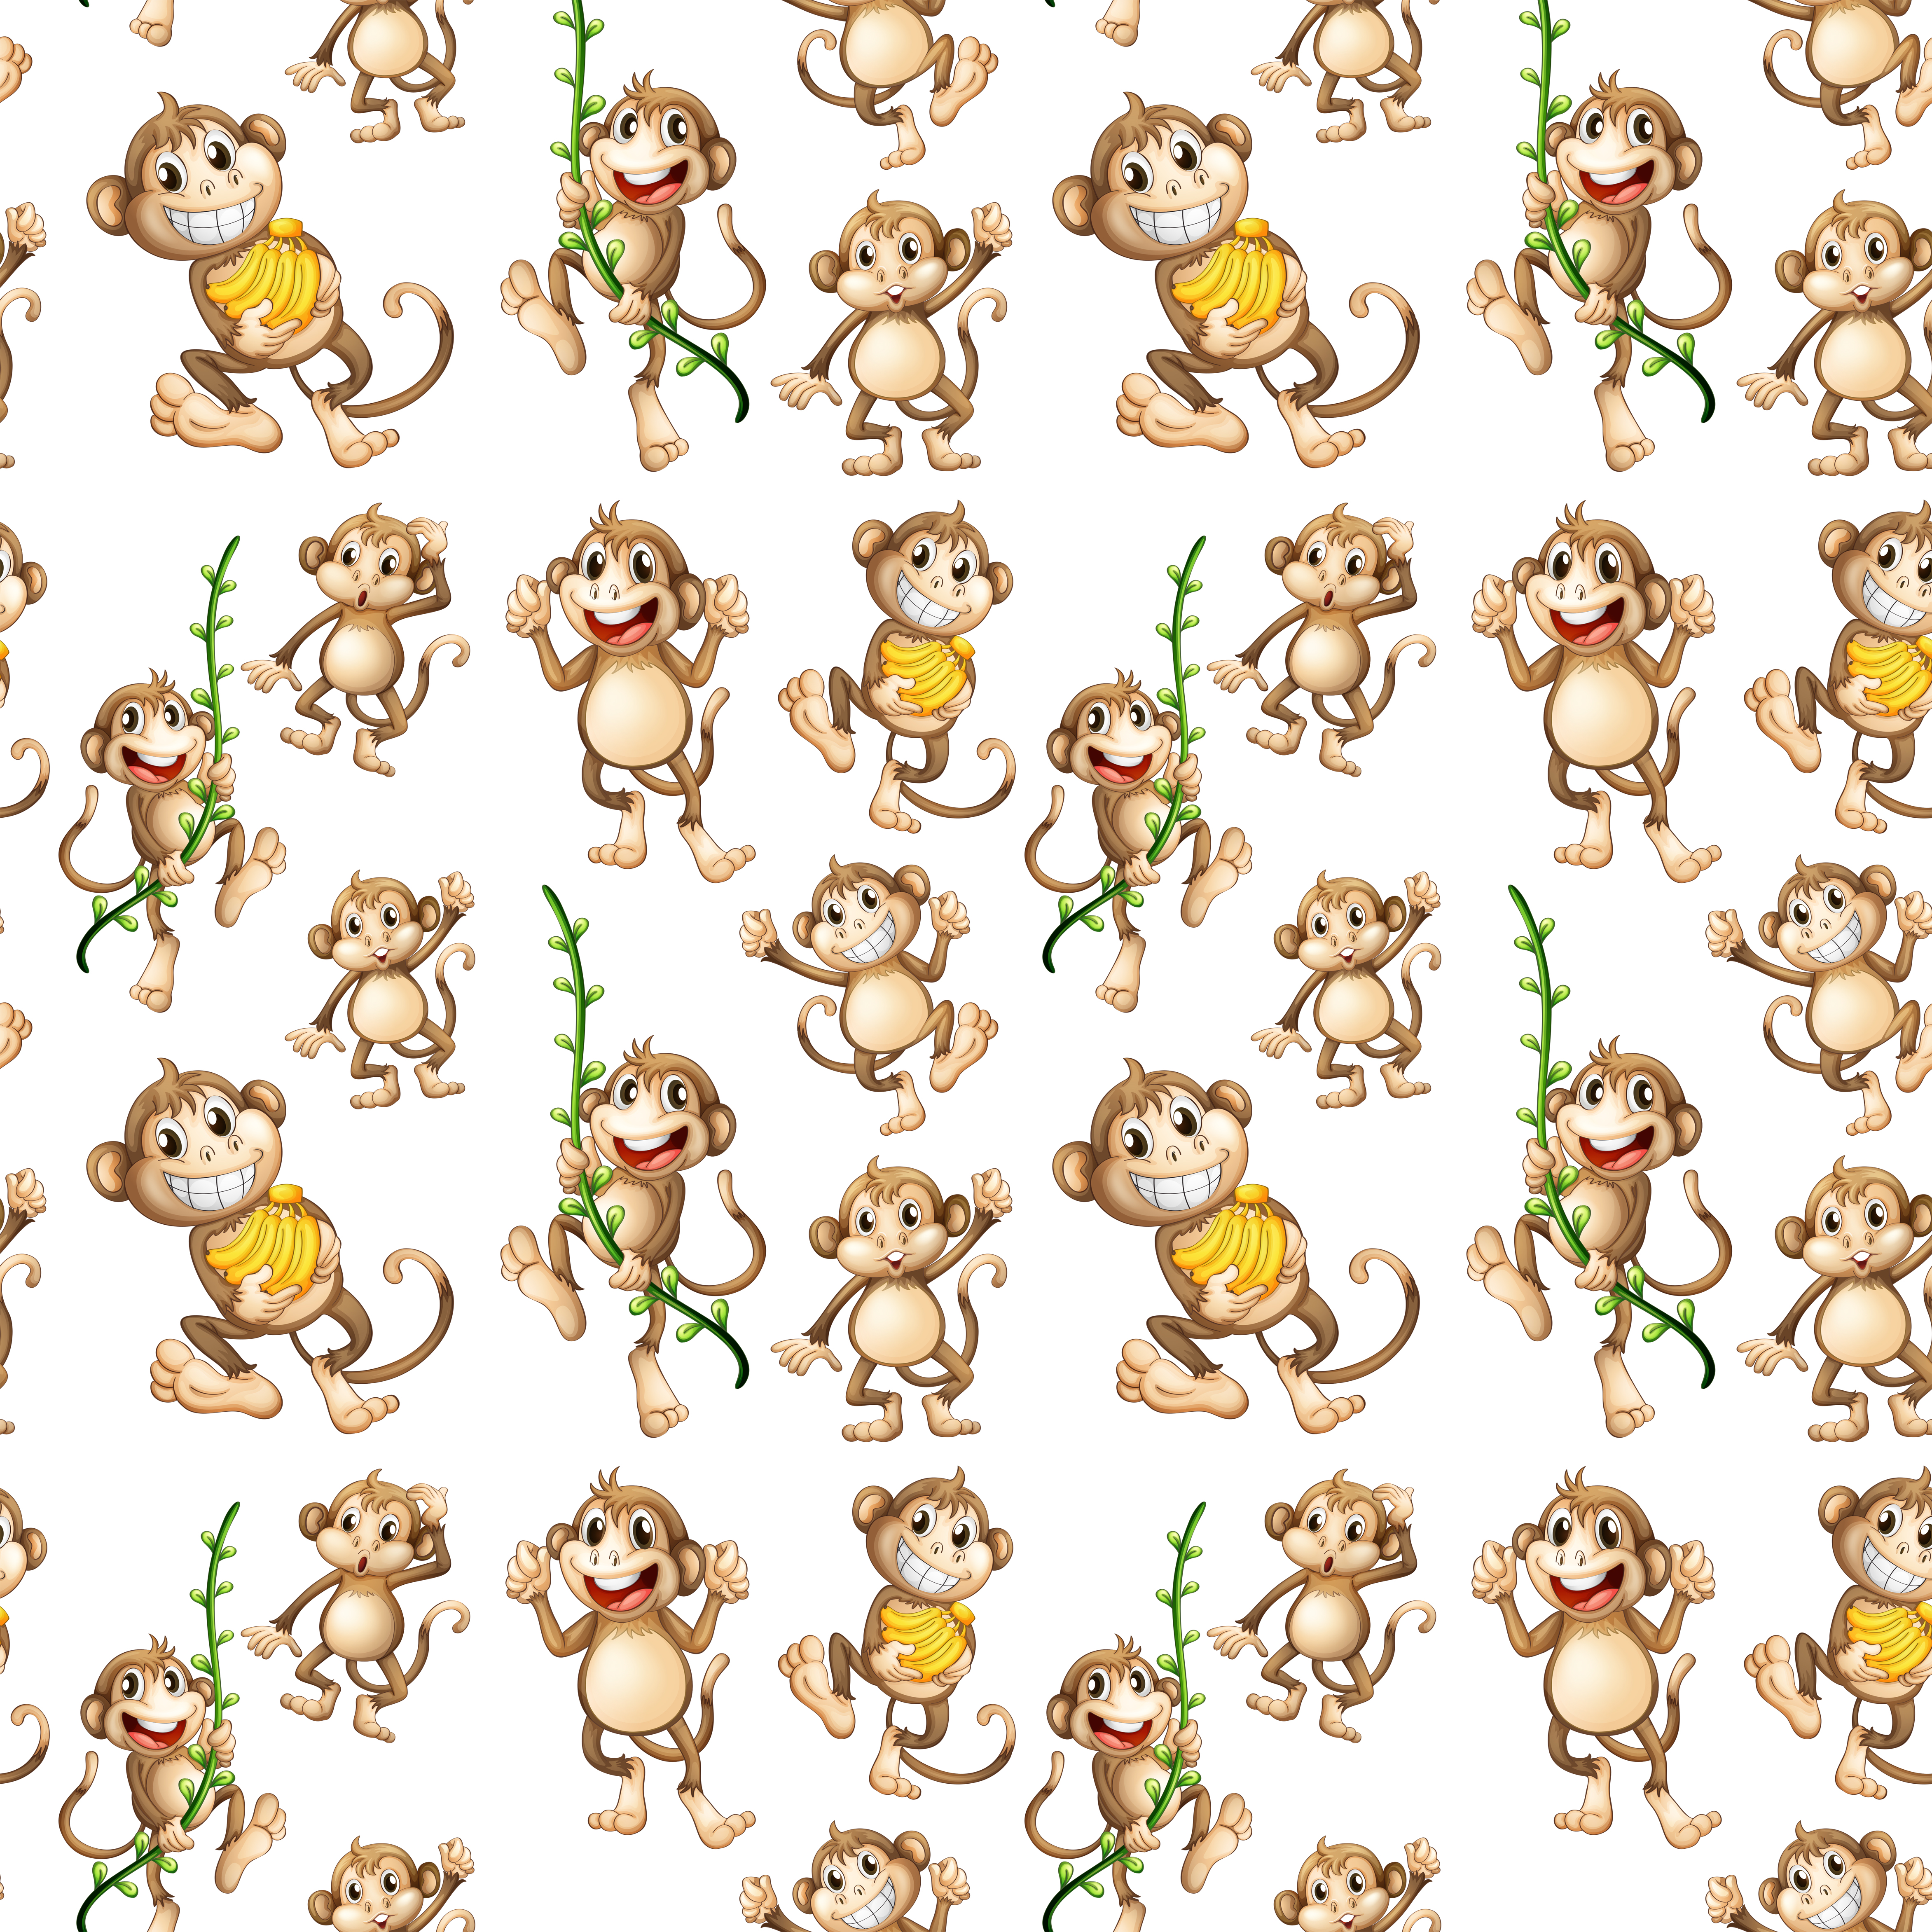 Happy monkey seamless pattern 445816 Download Free Vectors, Clipart